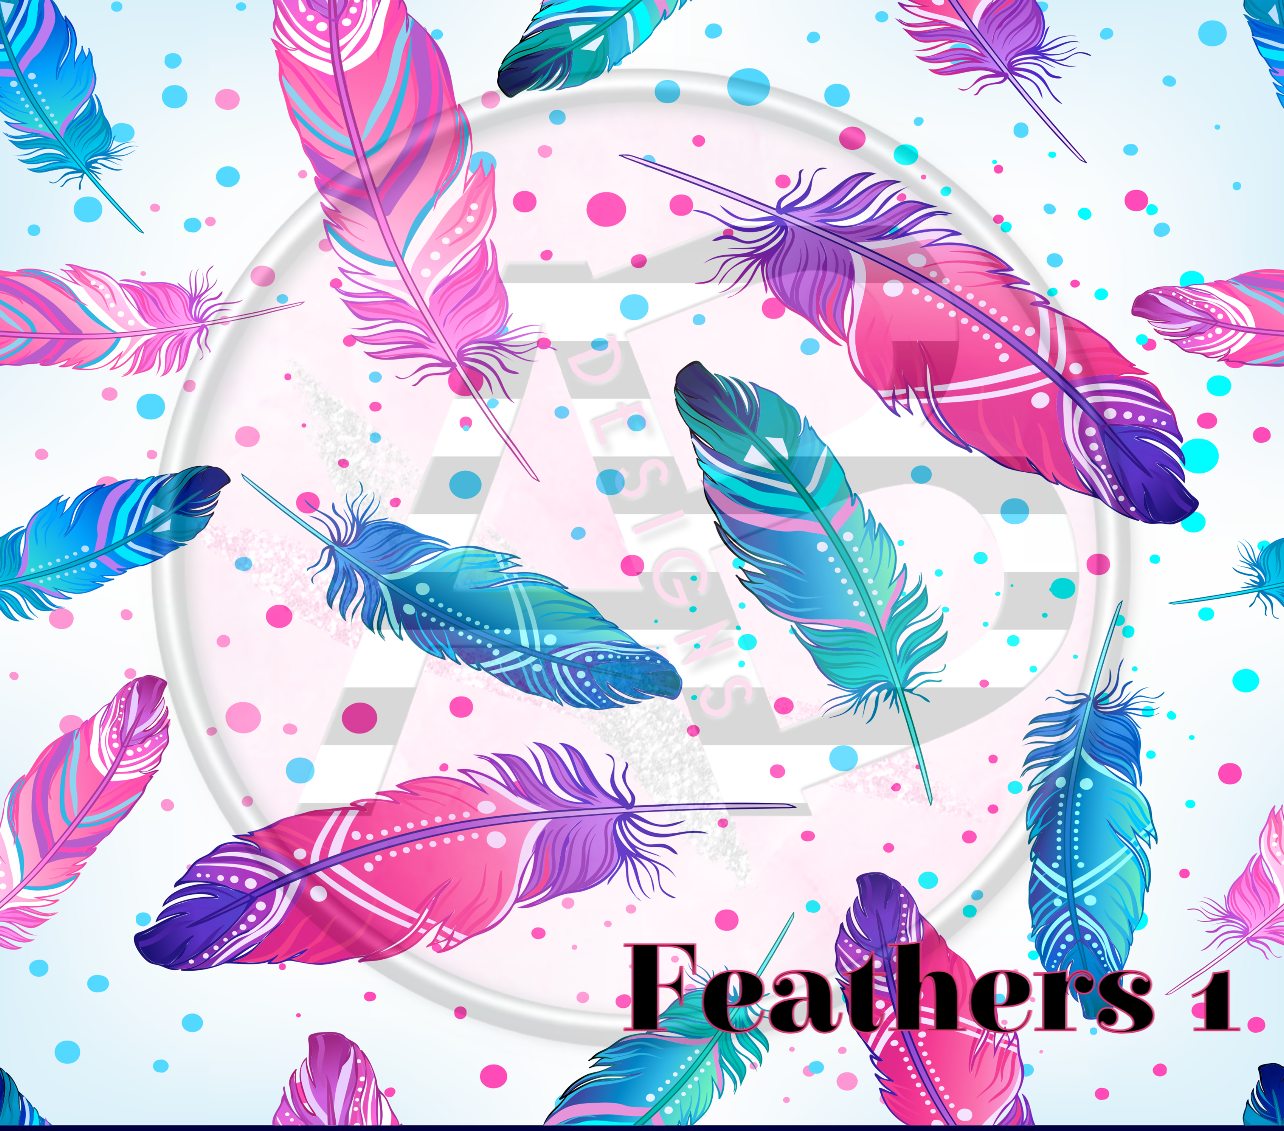 Adhesive Patterned Vinyl - Feathers 1